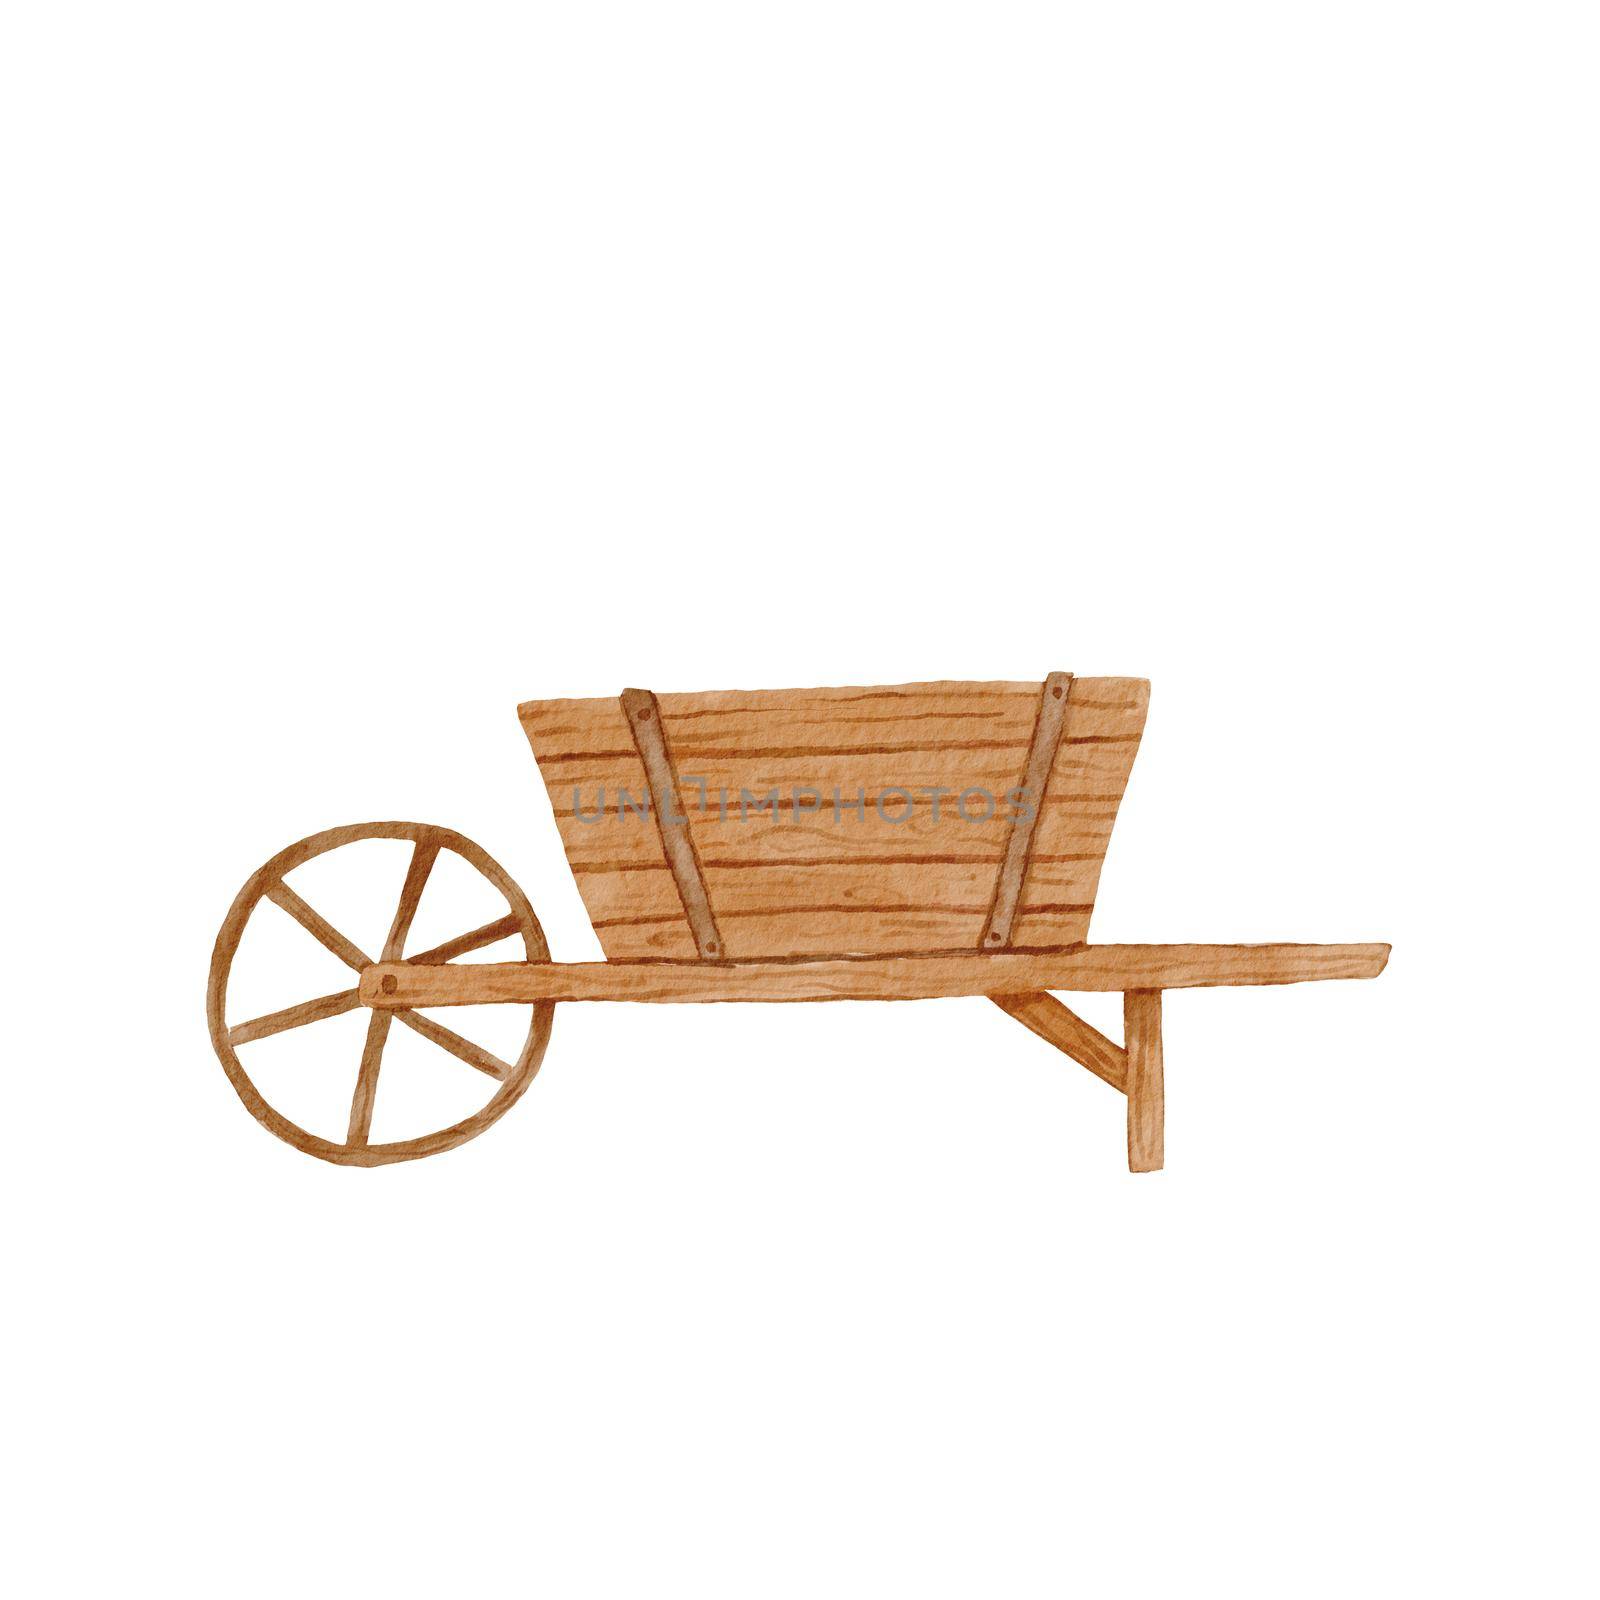 Watercolor garden wheelbarrow. Drawing illustration isplated on white background